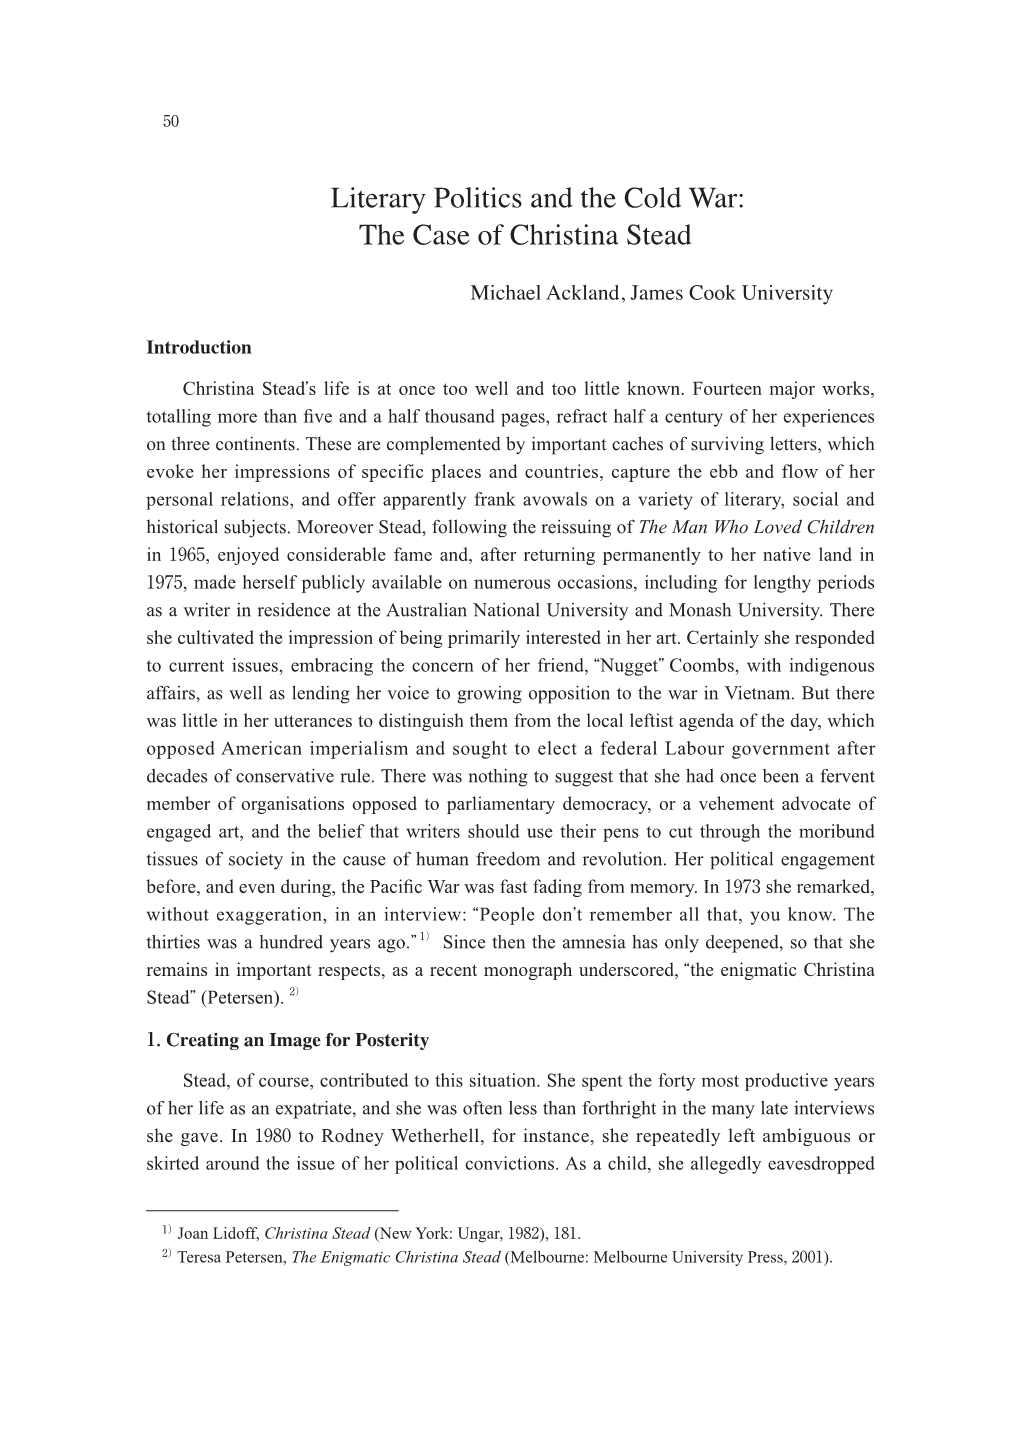 Literary Politics and the Cold War: the Case of Christina Stead